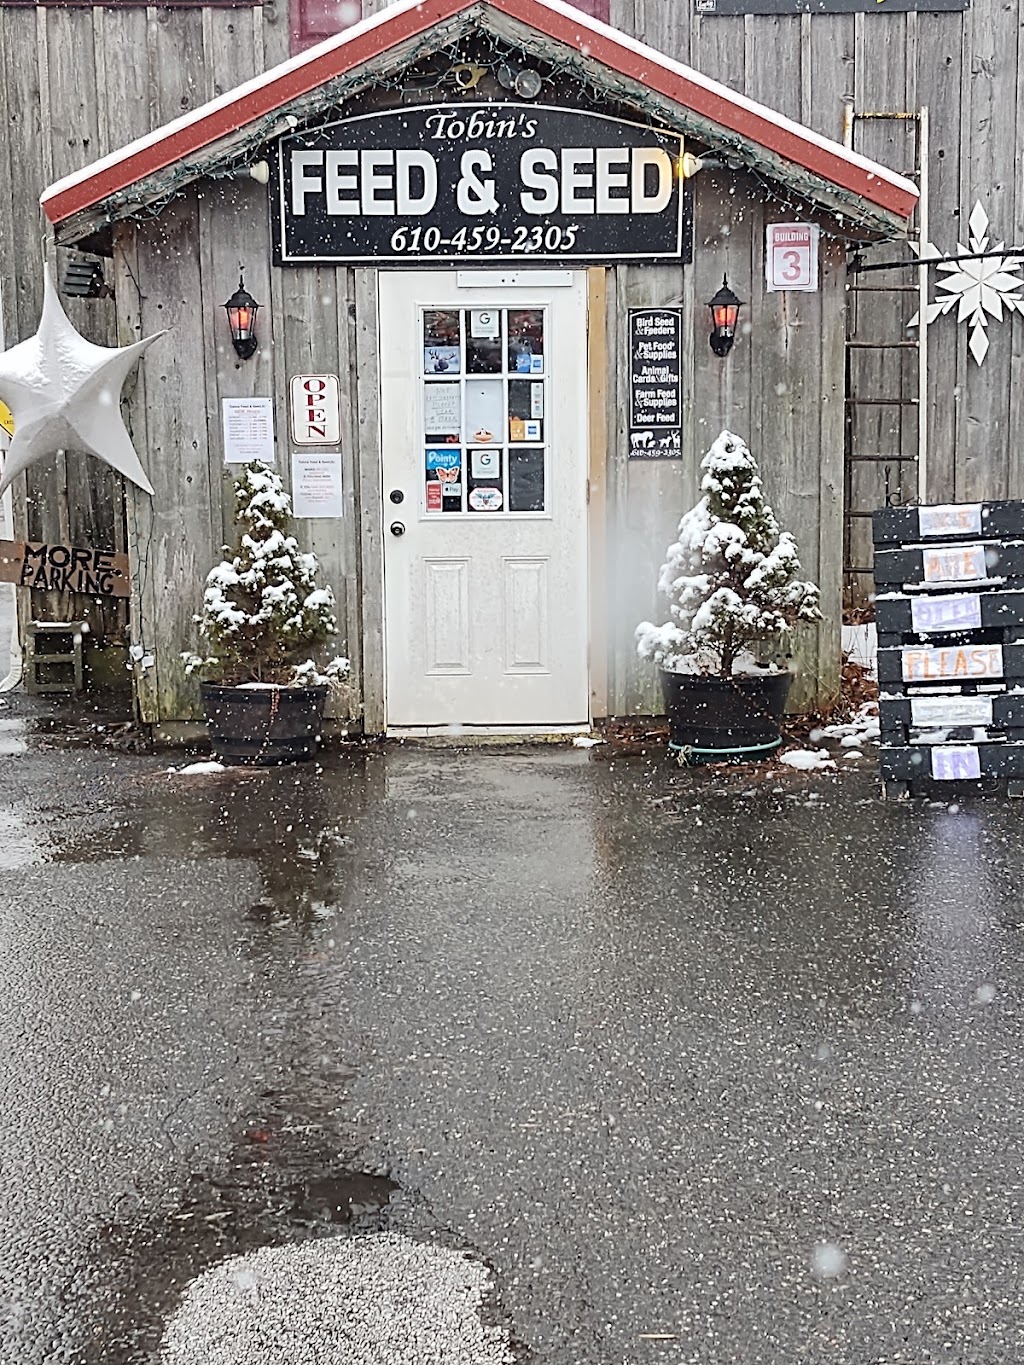 Tobins Feed & Seed | 1176 Middletown Rd, Media, PA 19063 | Phone: (610) 459-2305